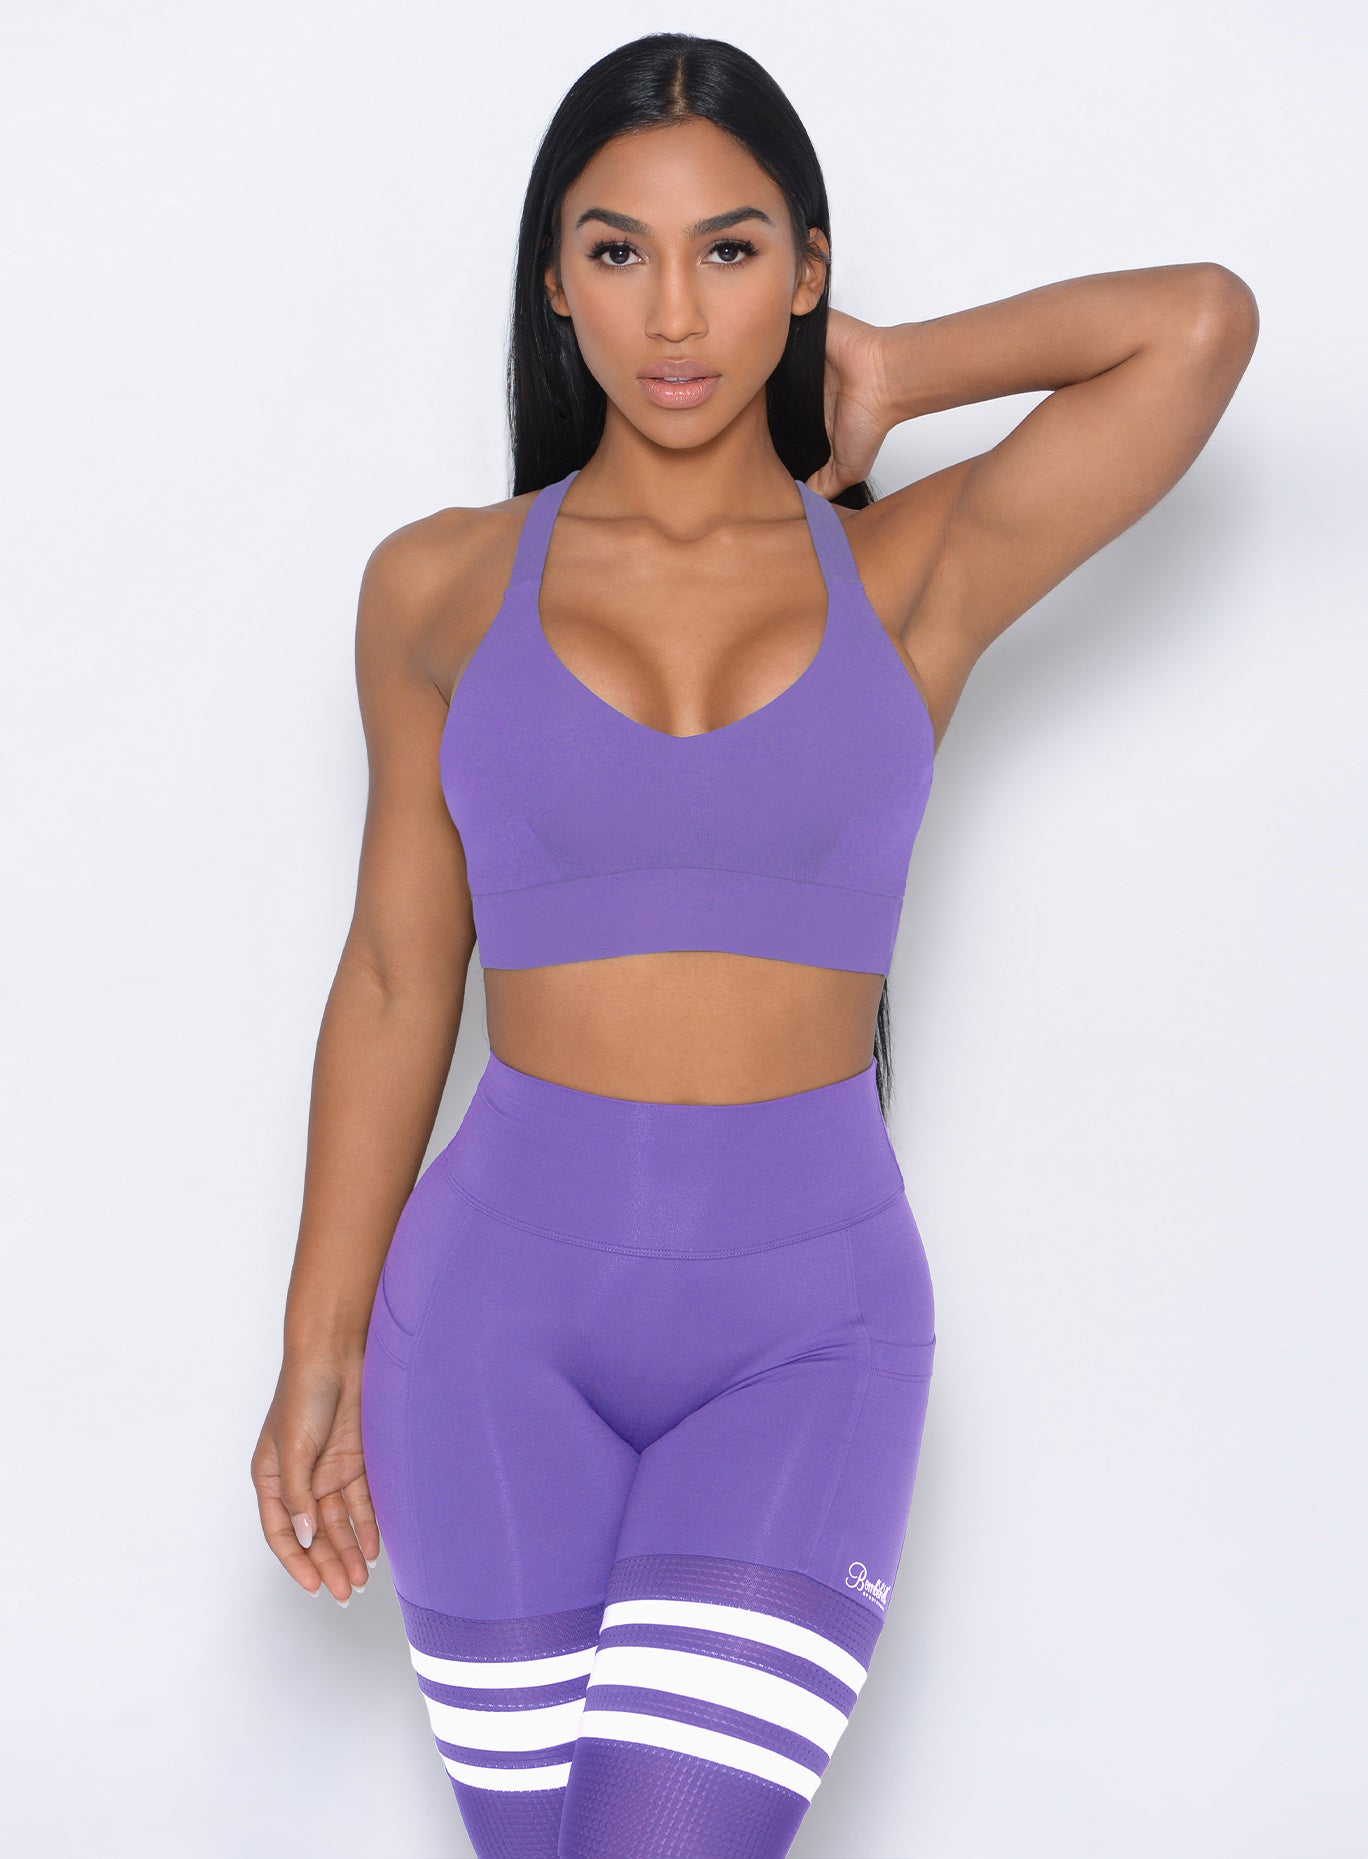 Model facing forward wearing our synergy sports bra in royal purple color and a matching leggings